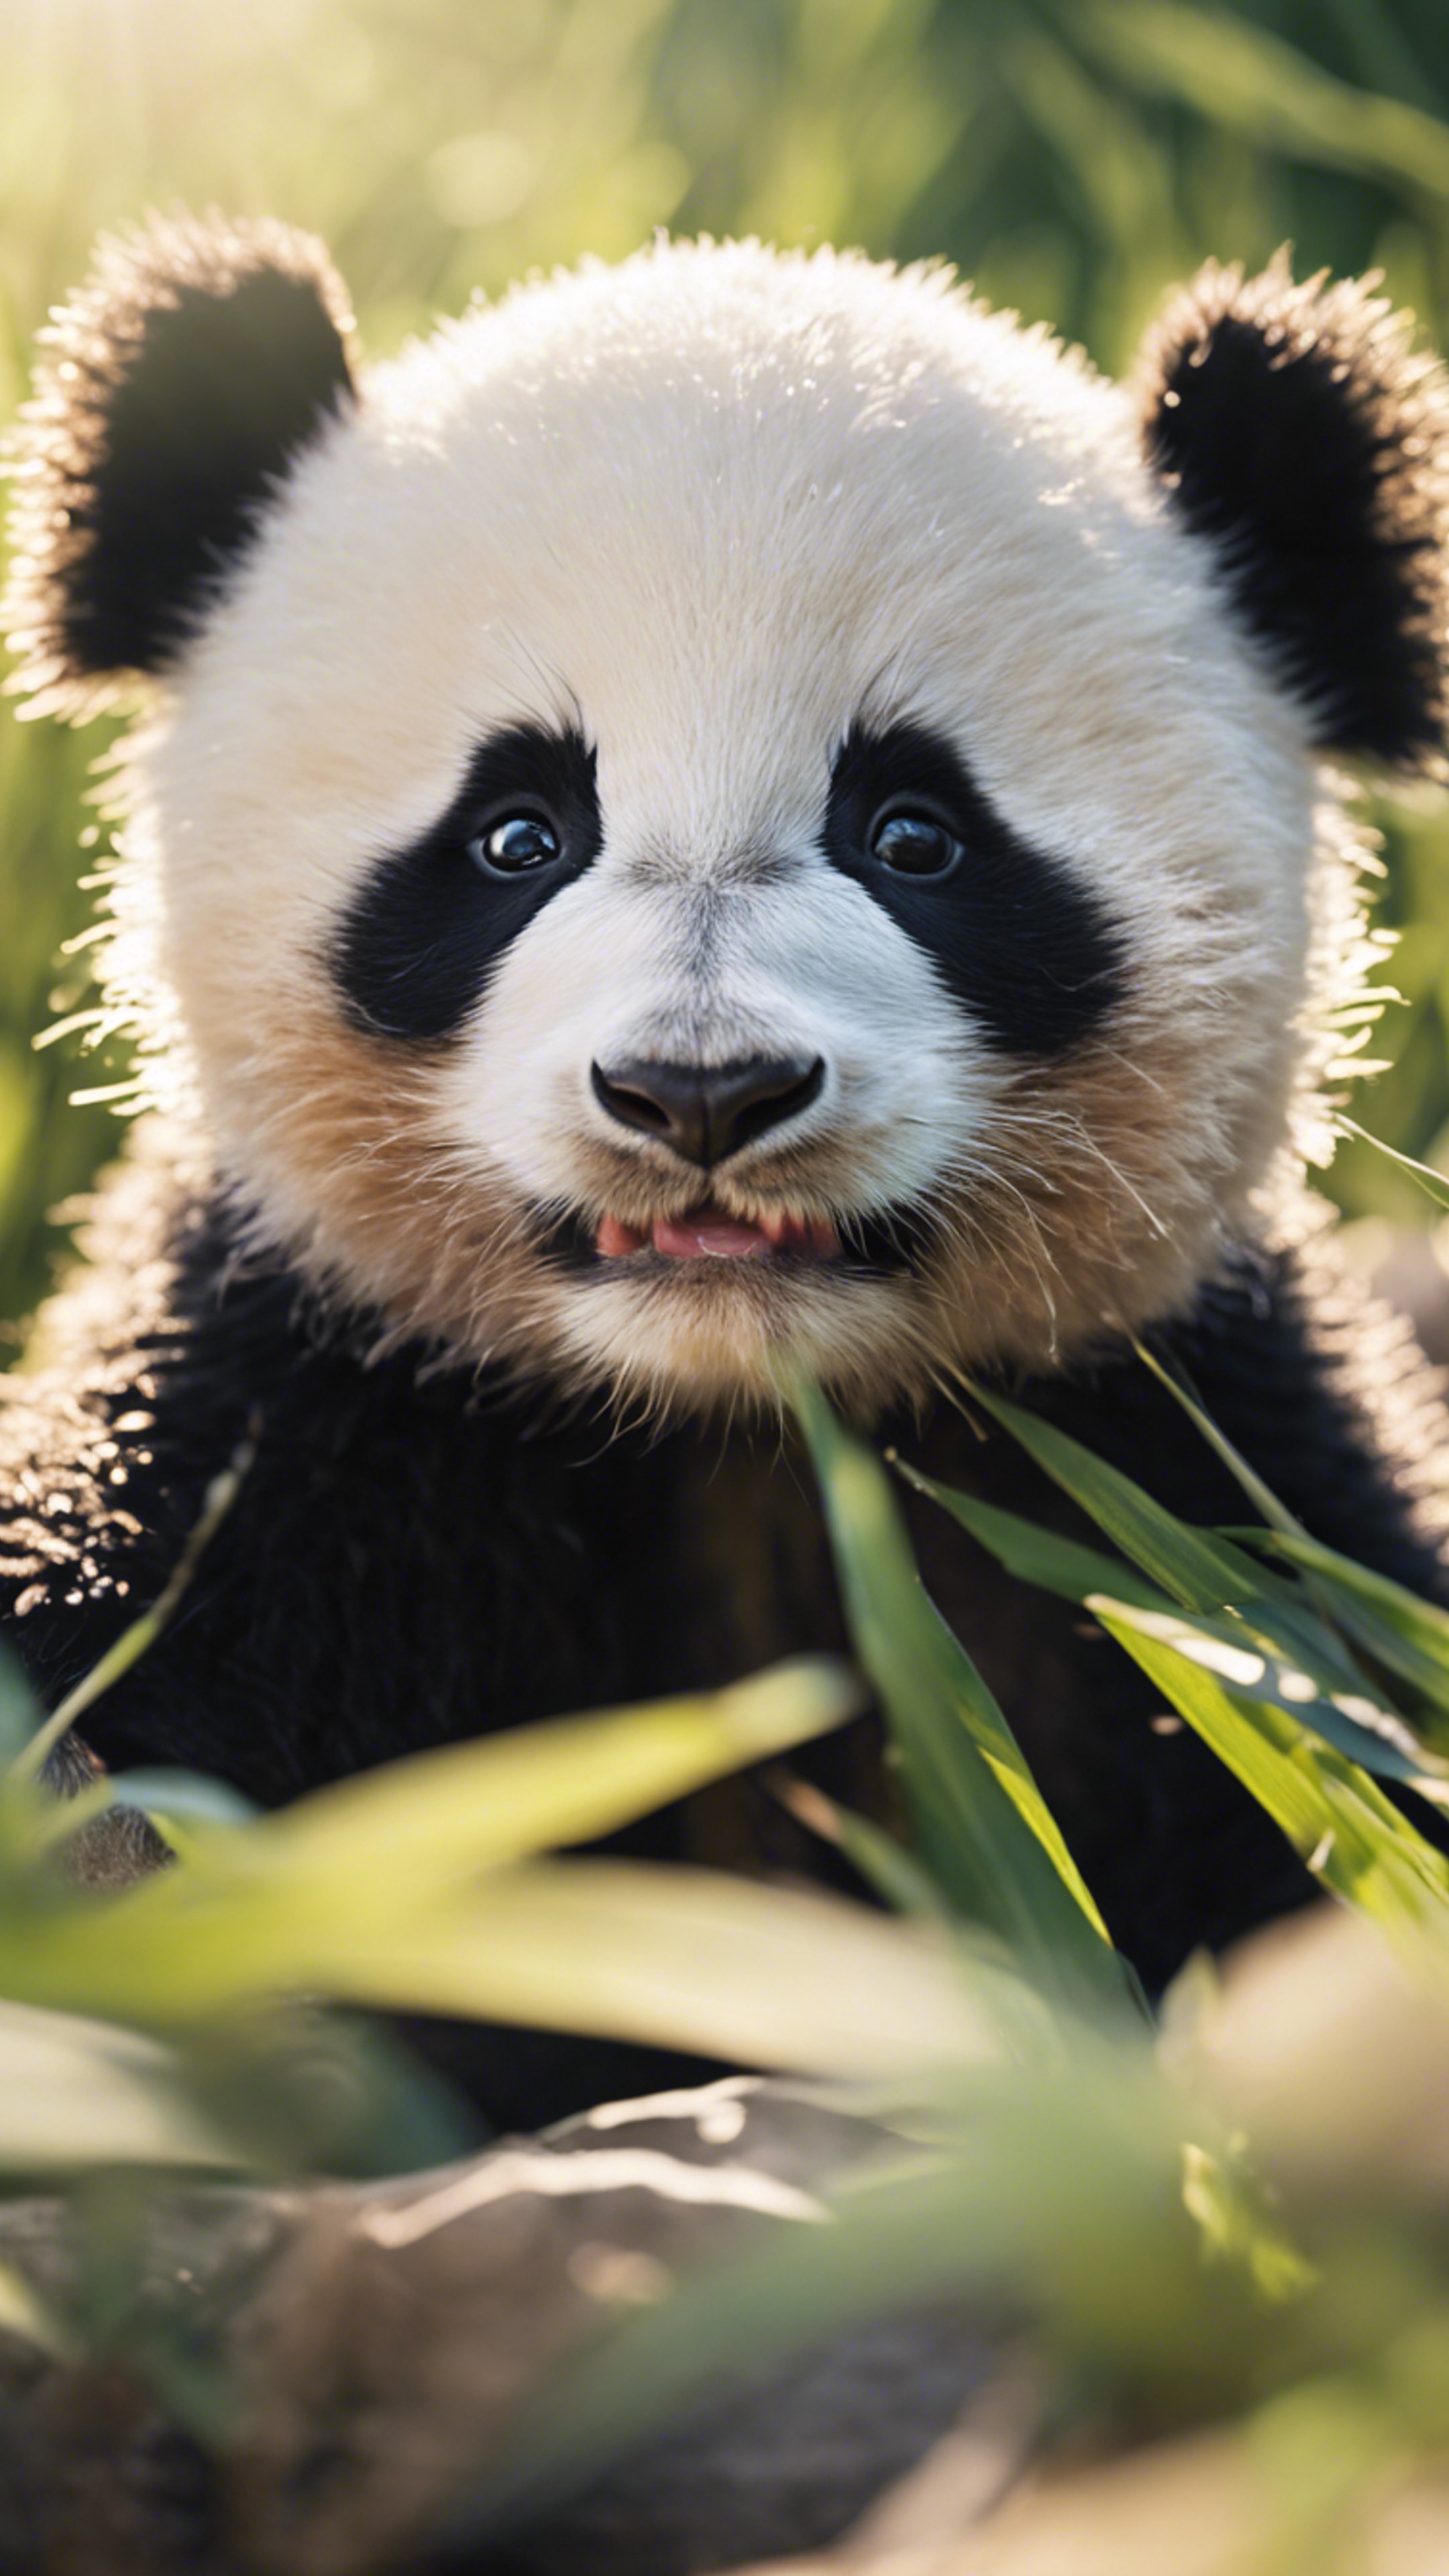 A cheeky panda cub pulling a funny face, under the warm and inviting summer sun. Ფონი[260c49d866ff4dc685e3]